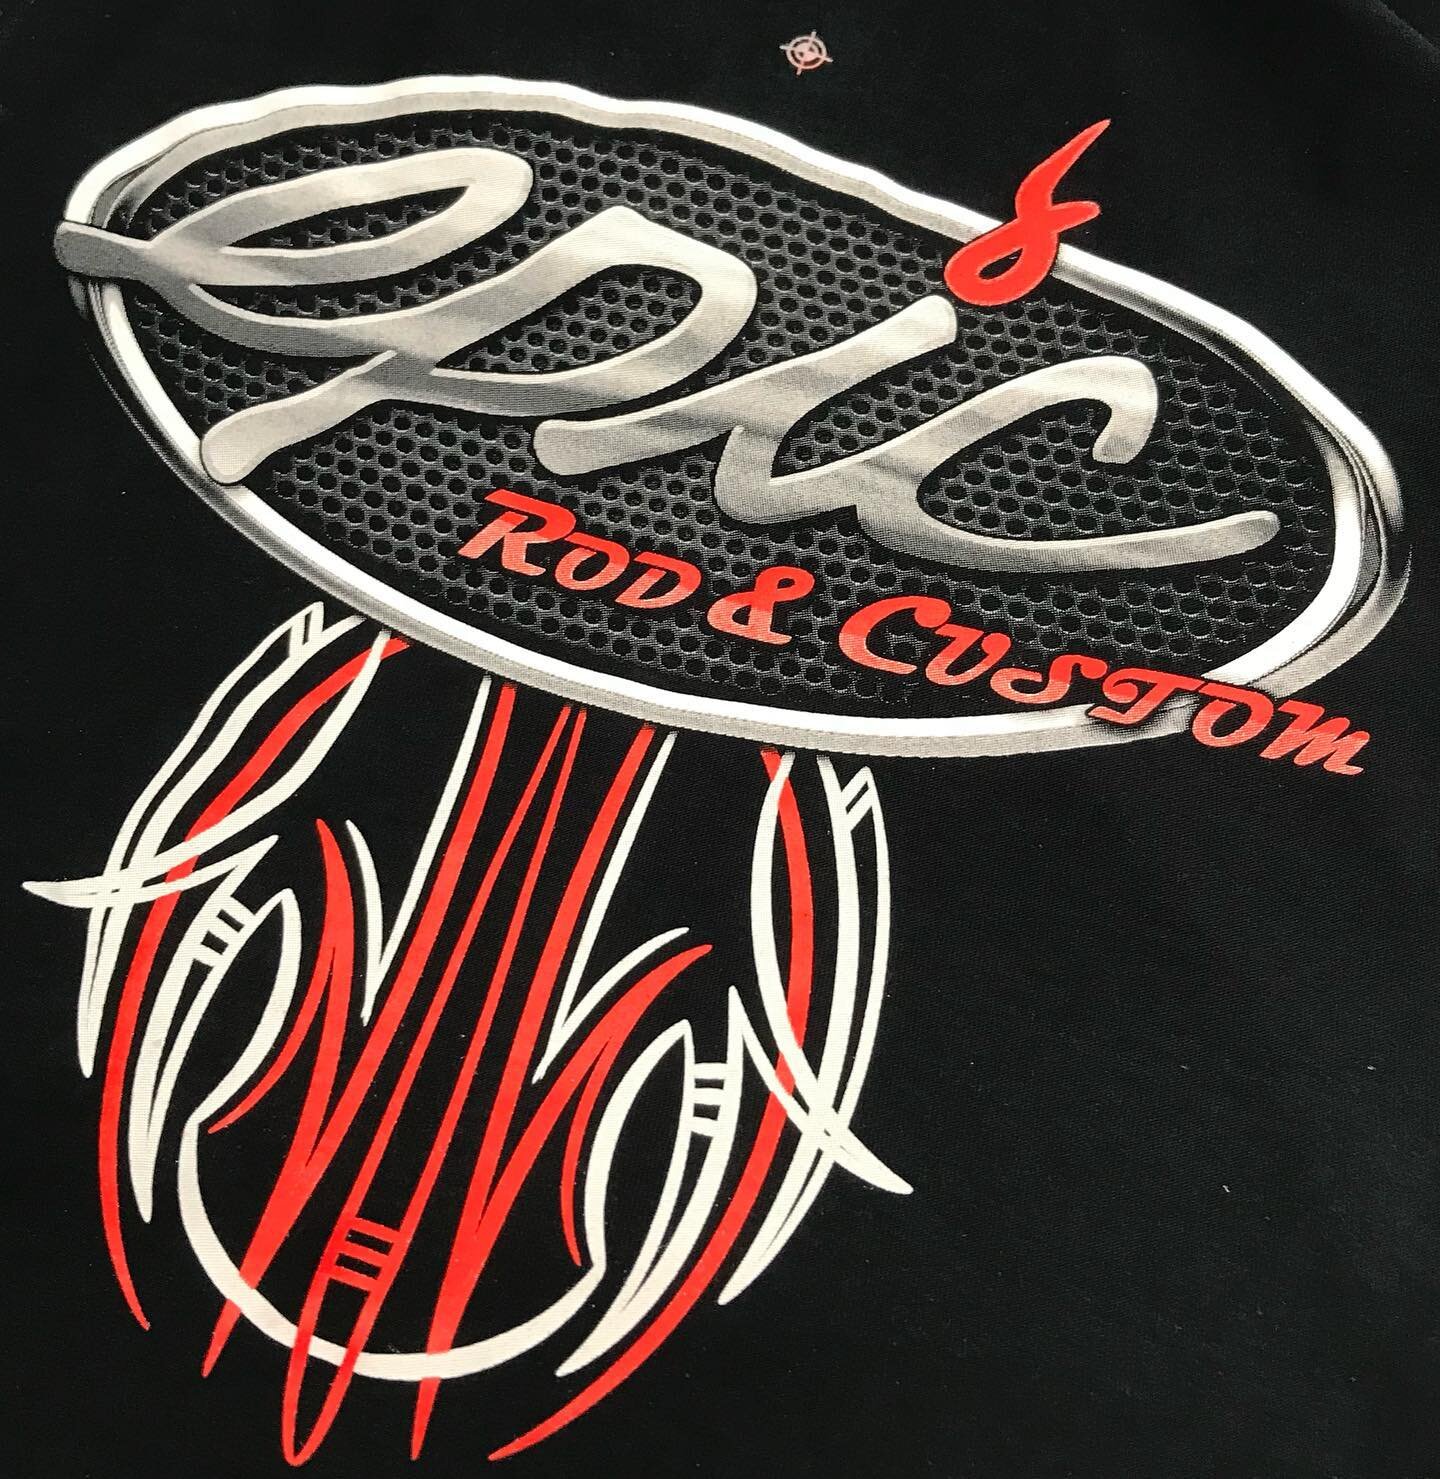 Here is a really cool print we did a couple years ago. I really like the honey comb grill and chrome look to this design. @epiccustoms  #screenprint #screenprinting #embroidery #leduc #alberta #edmonton #calgary #yeg #yyc #yeggers #yeglife #yycliving